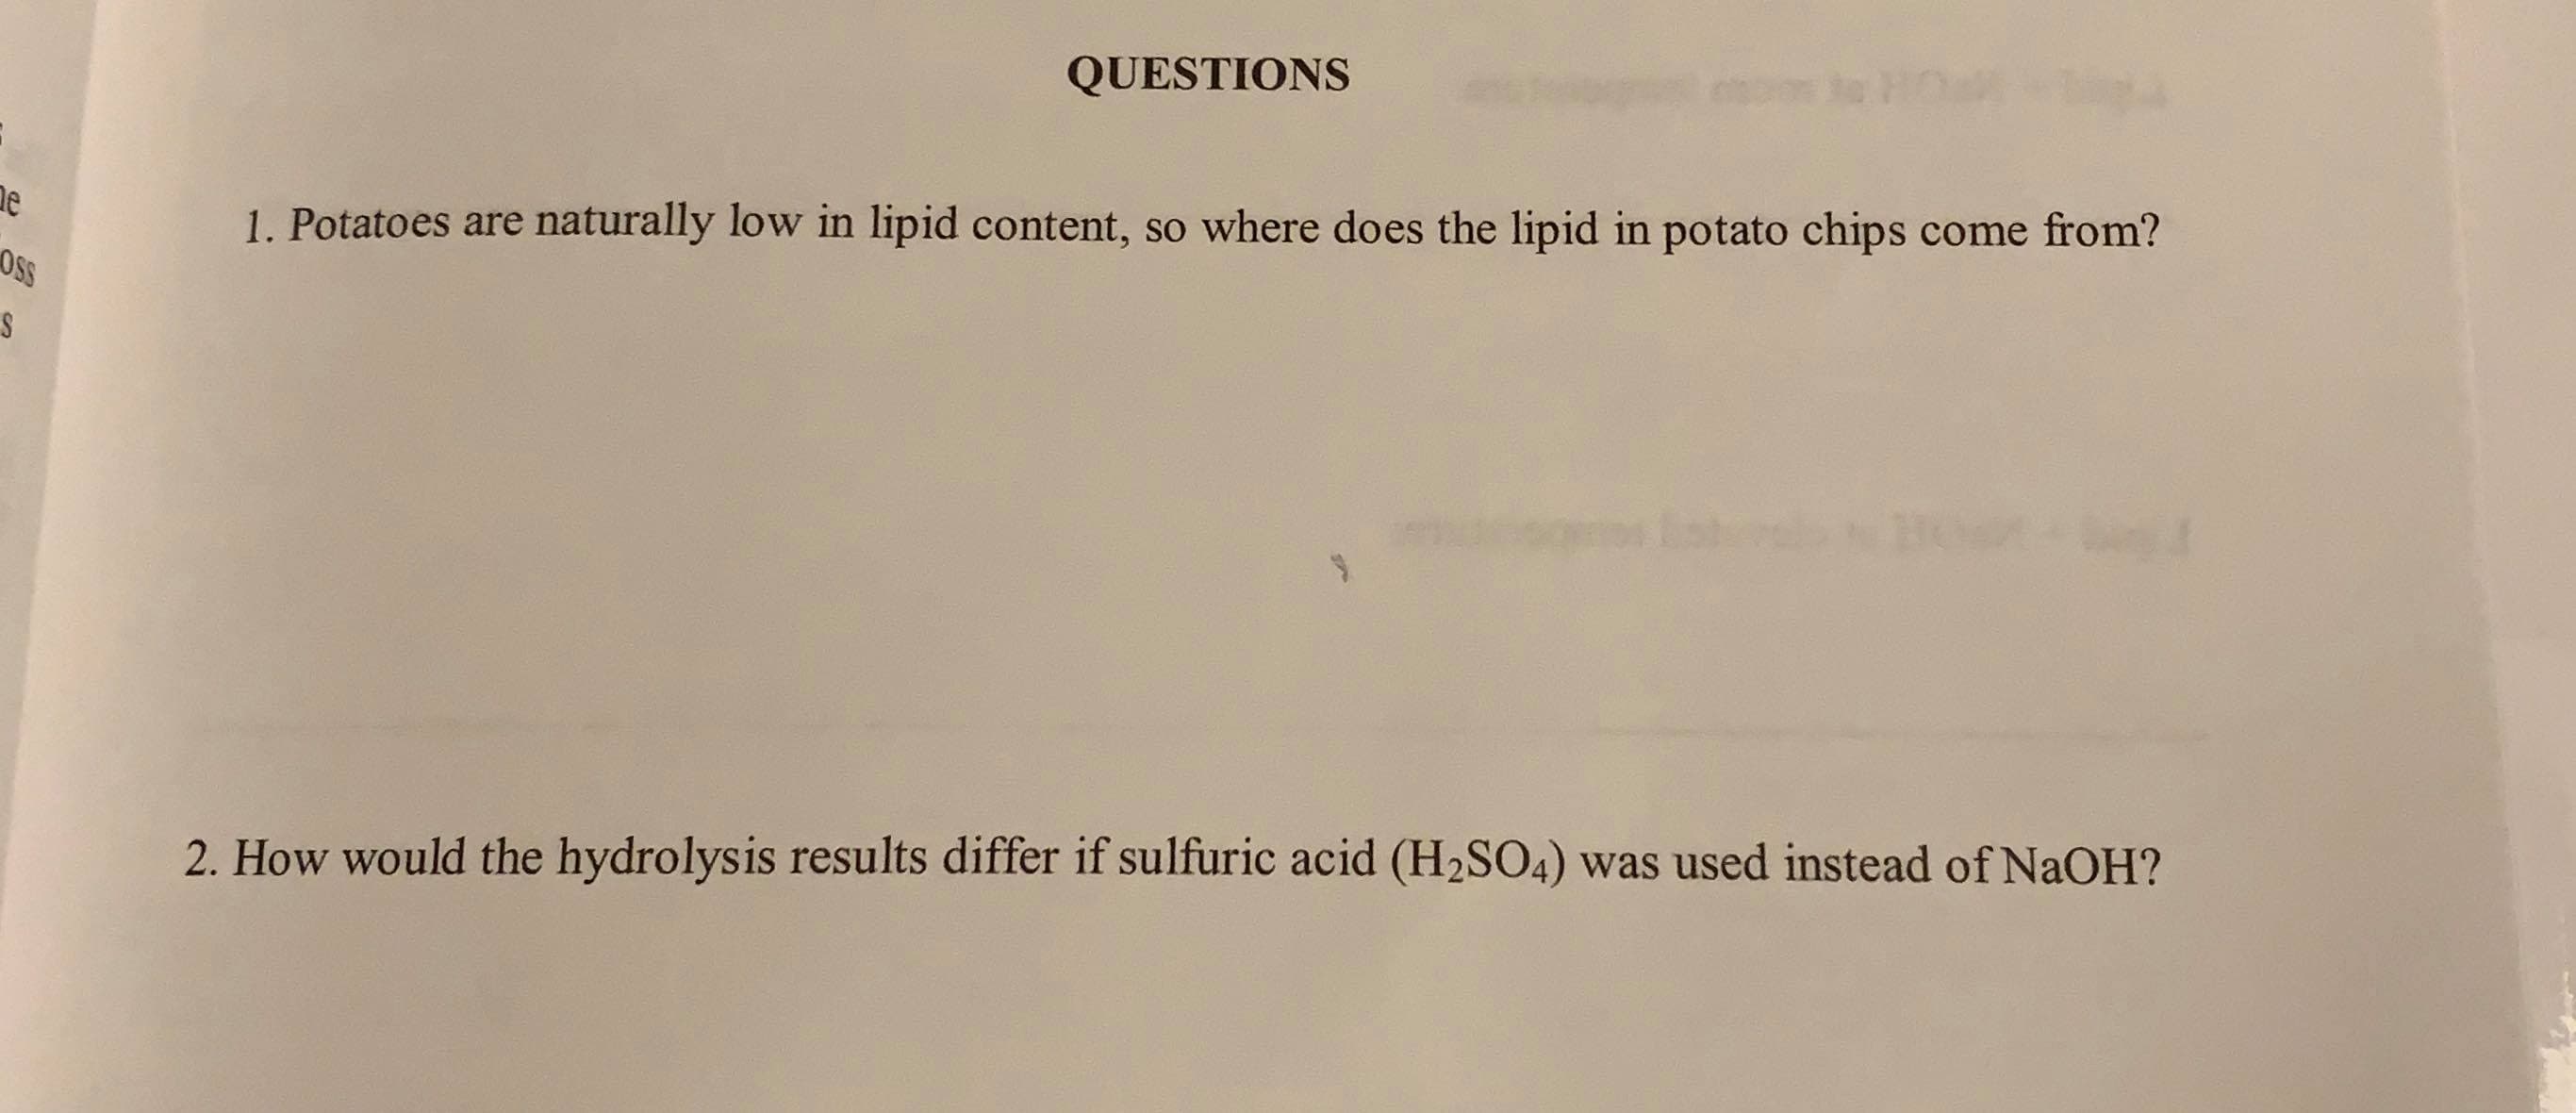 1. Potatoes are naturally low in lipid content, so where does the lipid in potato chips come from?
2. How would the hydrolysis results differ if sulfuric acid (H2SO4) was used instead of NaOH?
